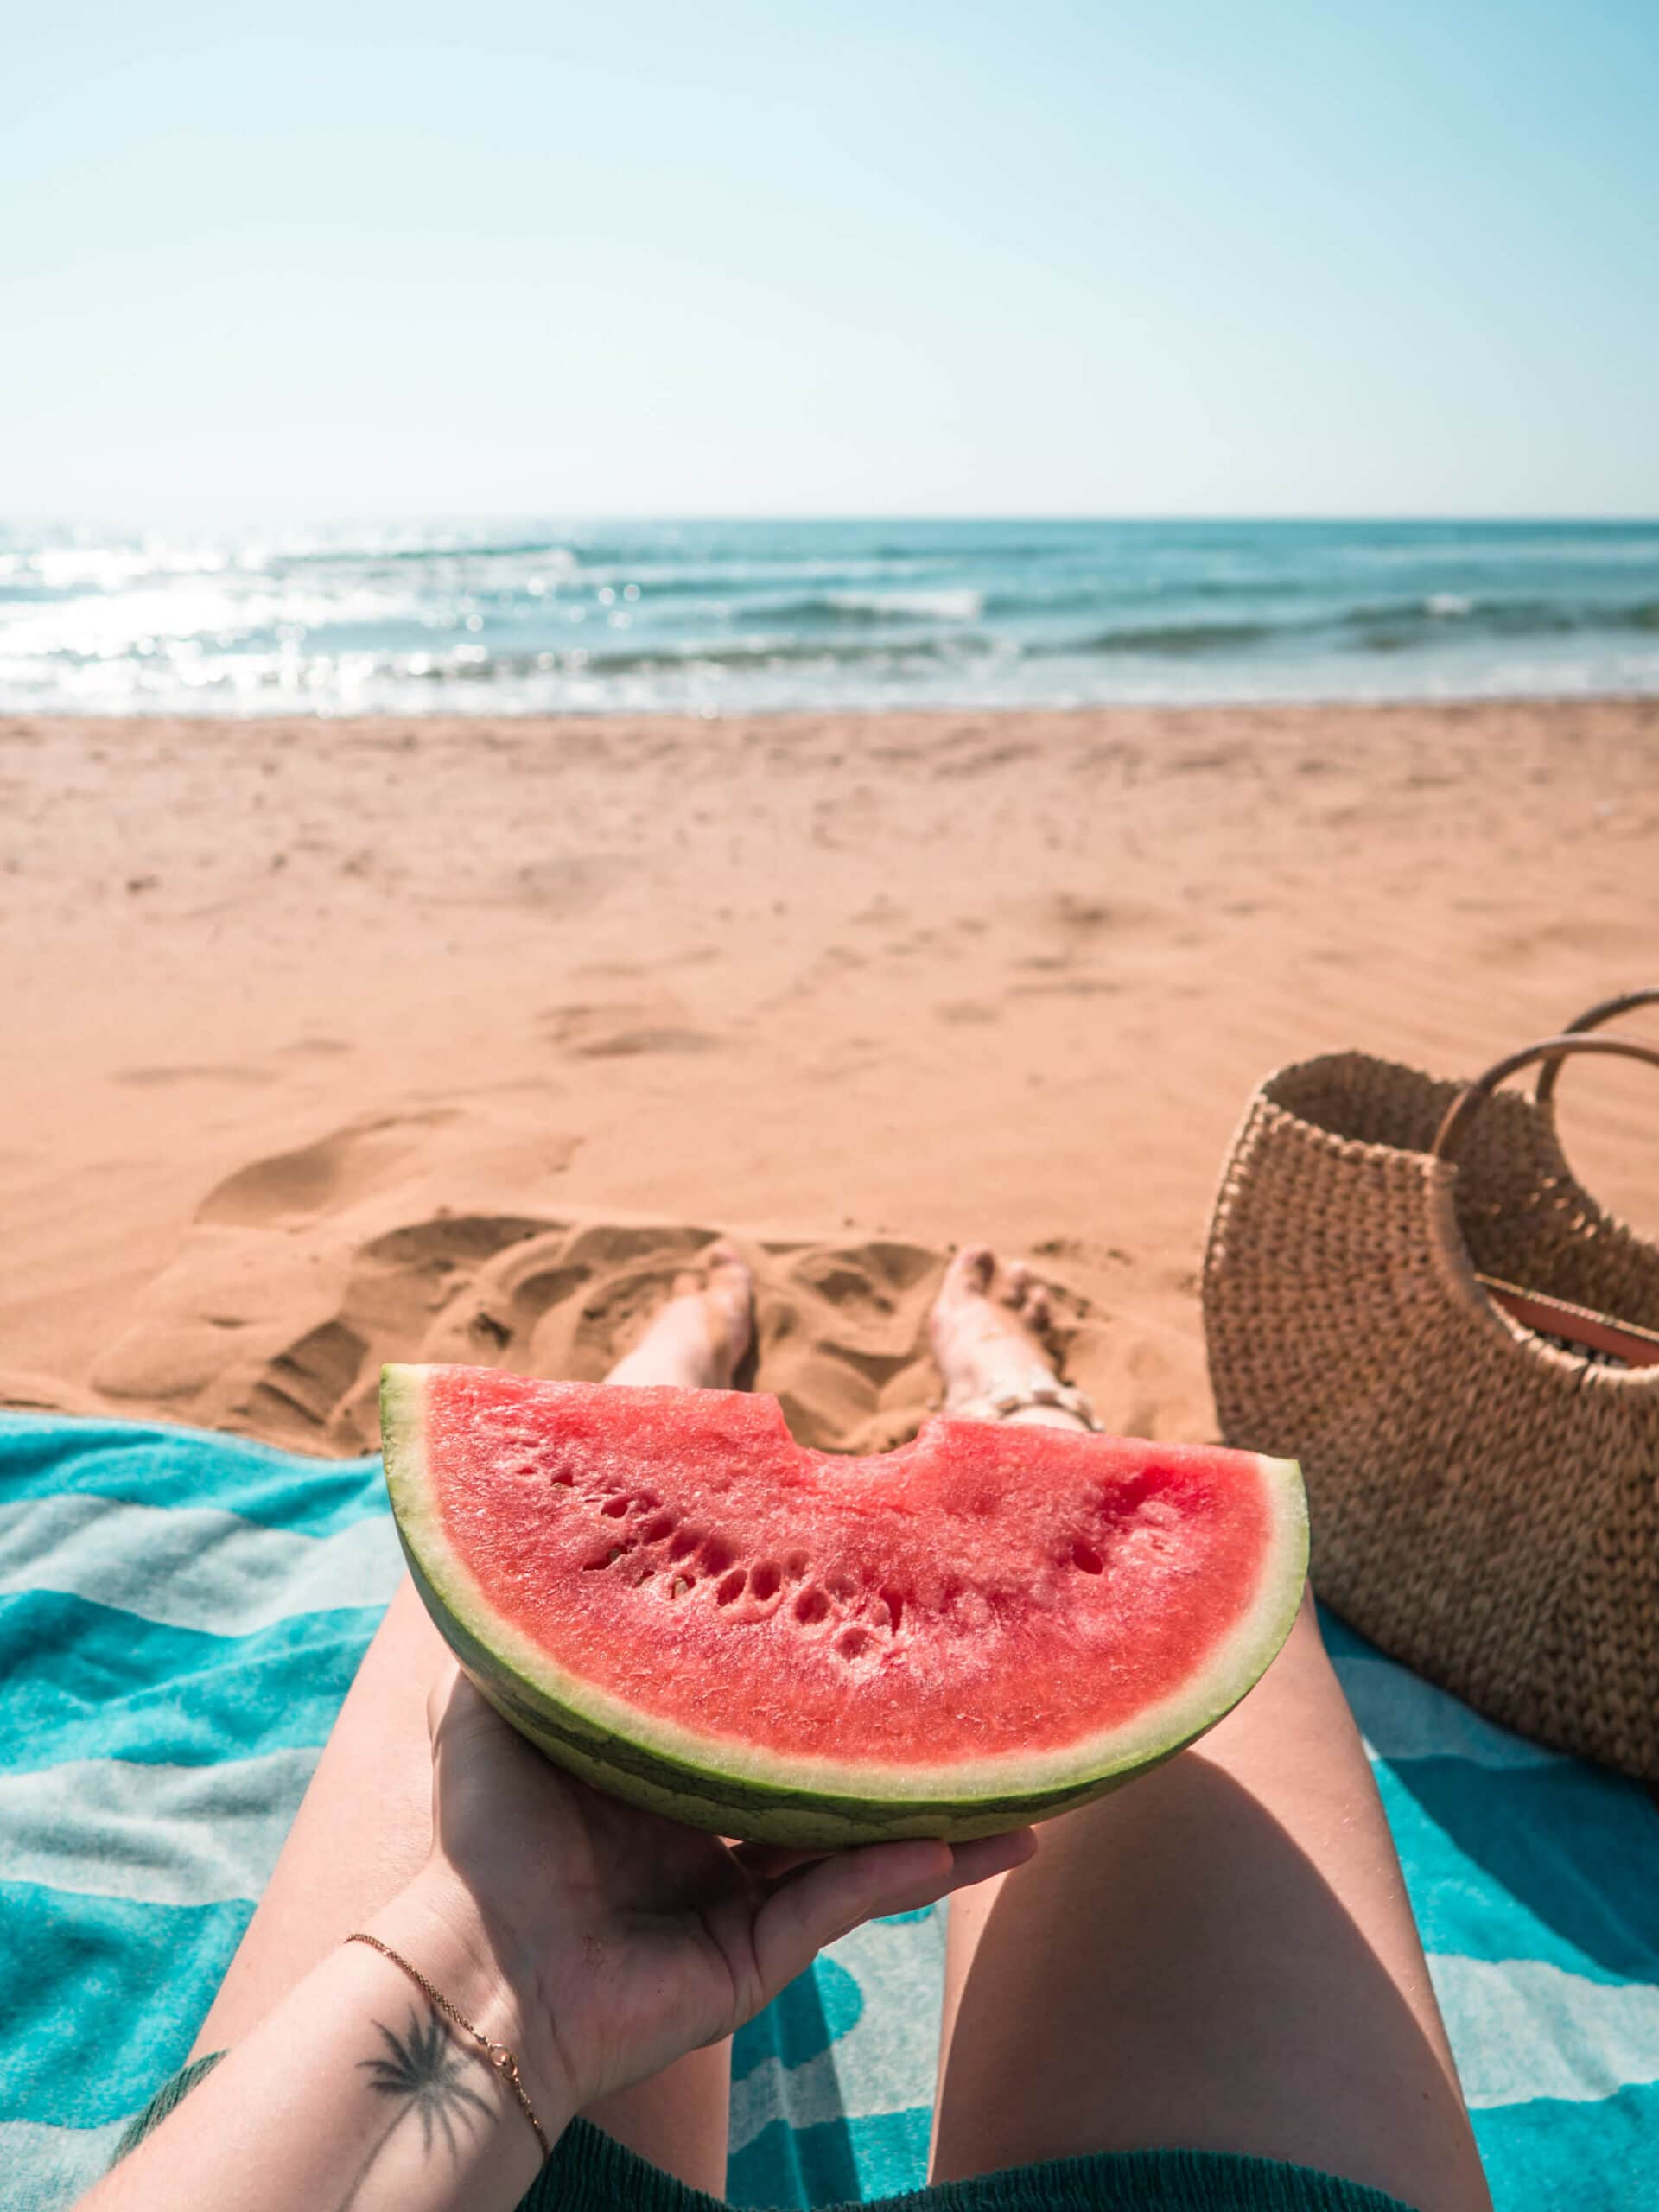 Girl sitting on a turquoise towel in the sand holding a piece of watermelon at Playas Calblanque just outside Cartagena in Spain